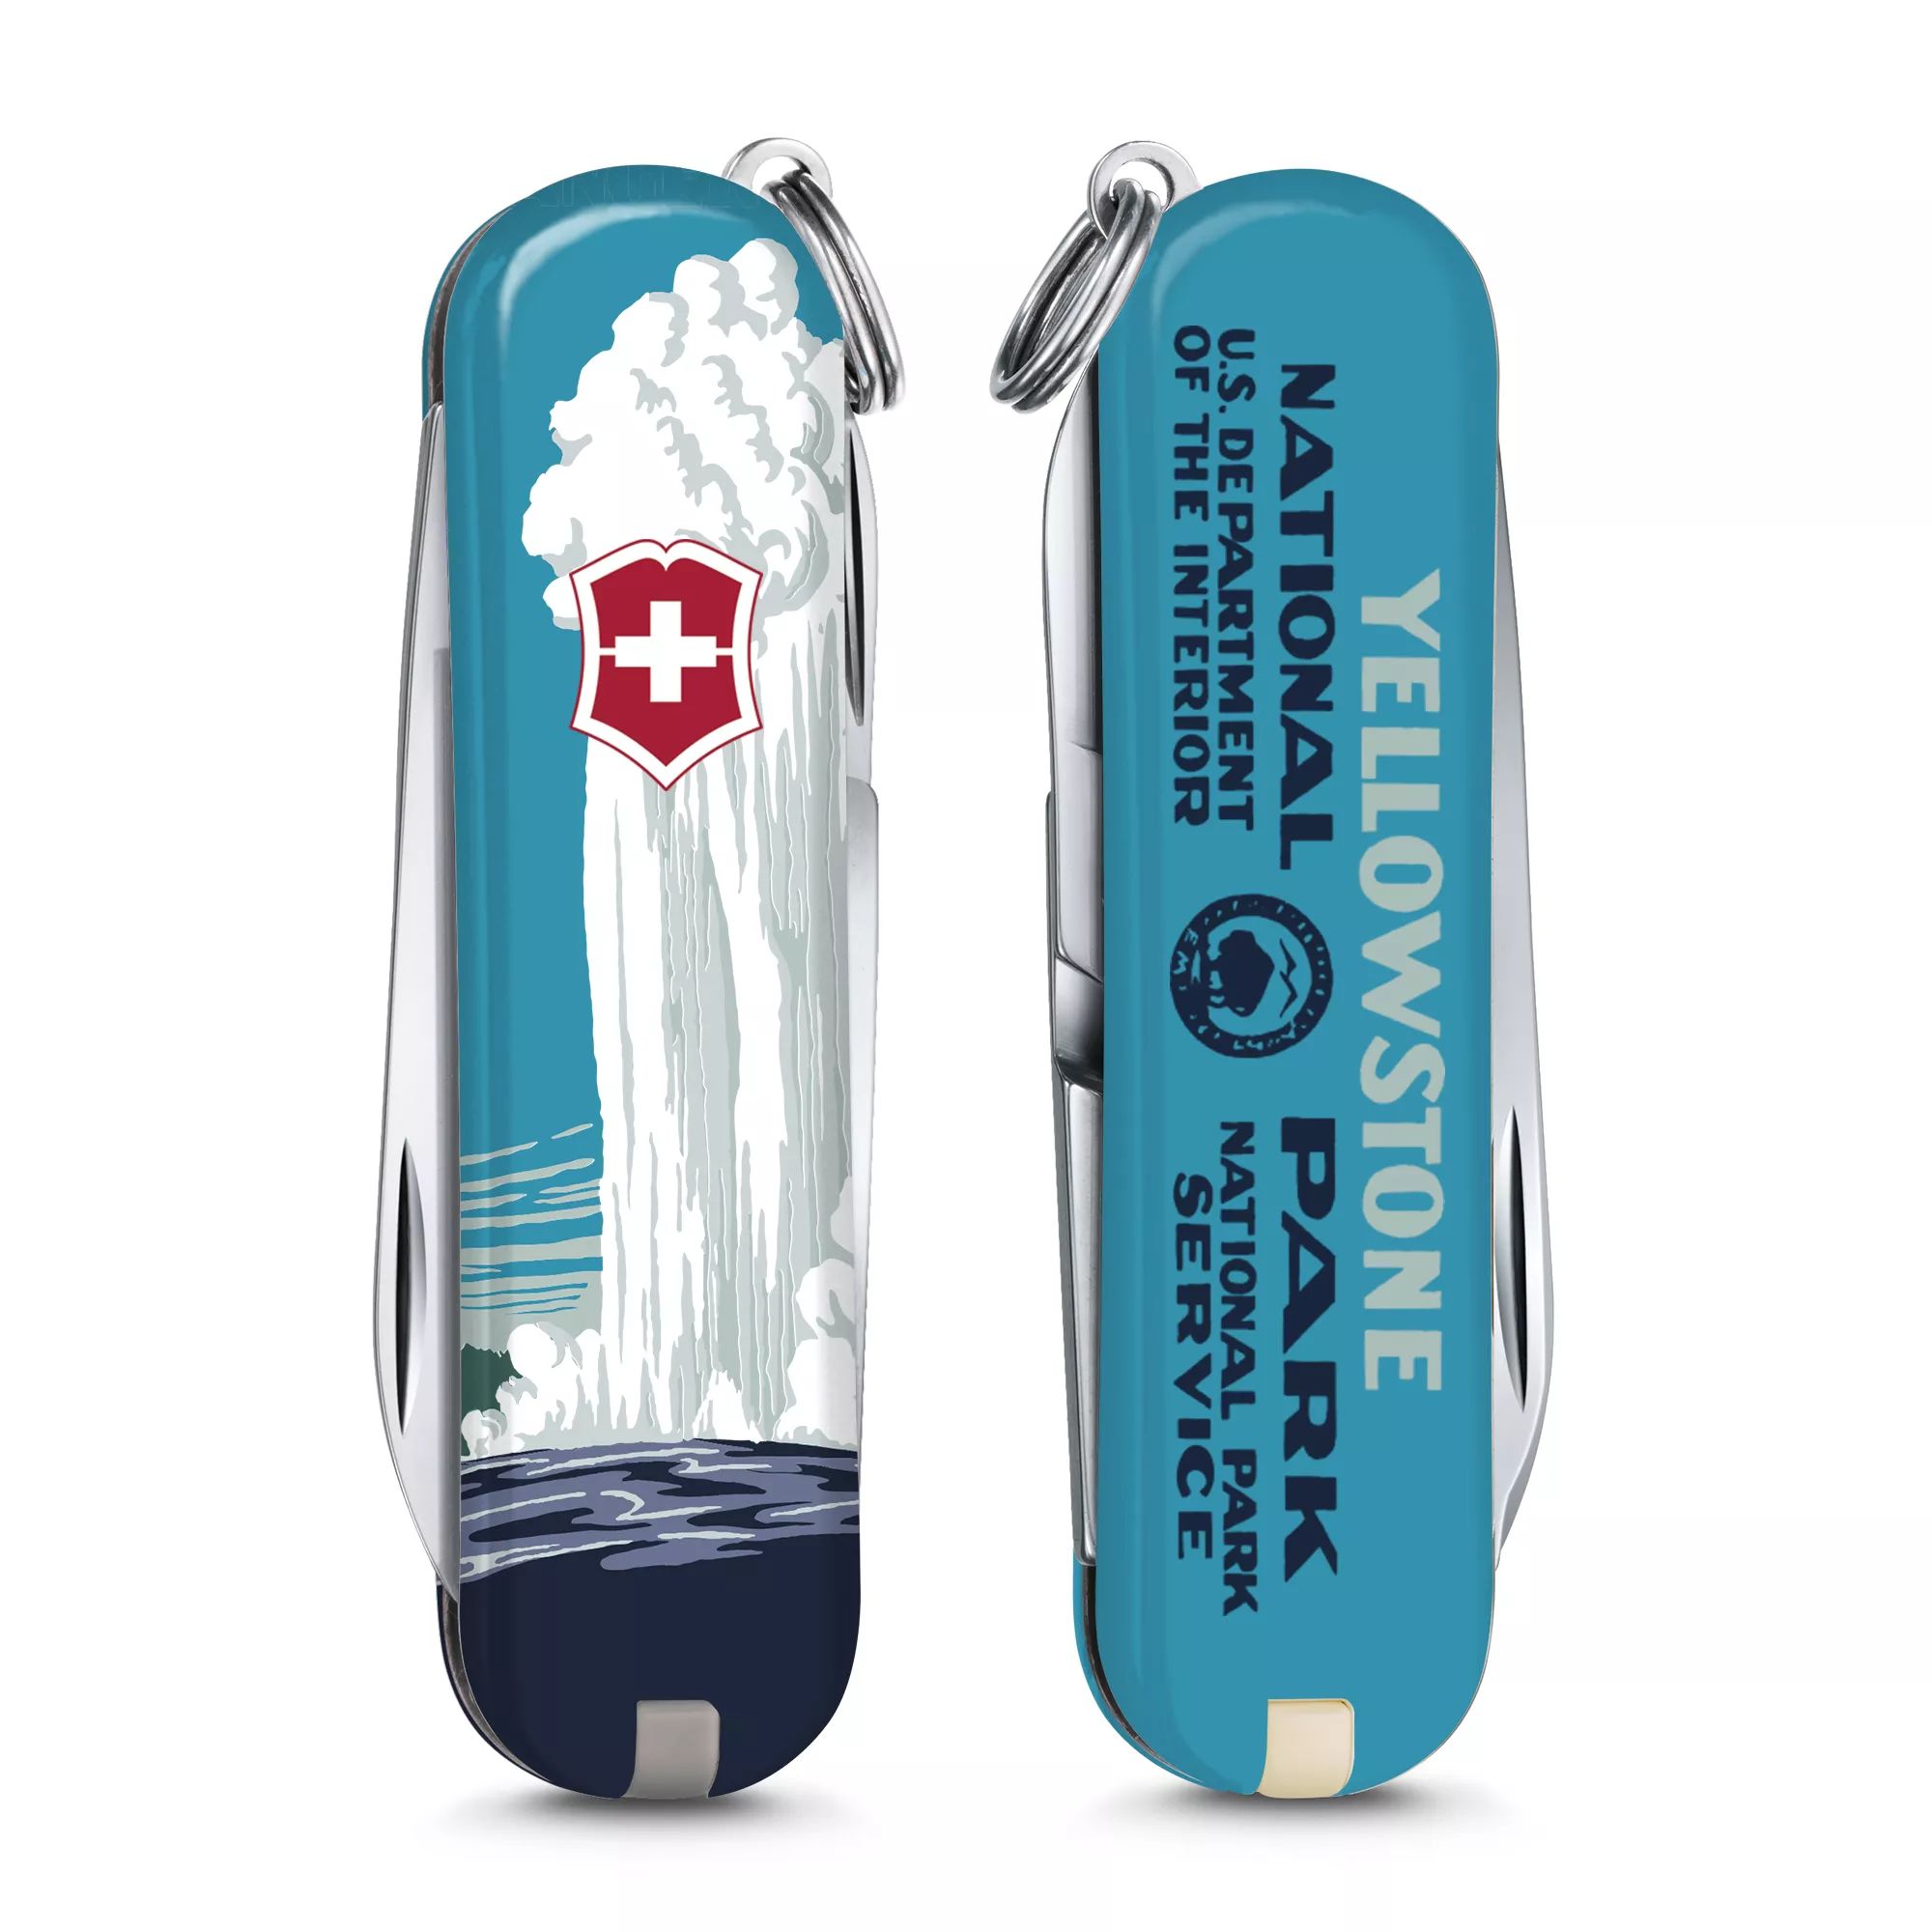 Victorinox Classic SD US National Park in Rocky Mountains - 0.6223-X27